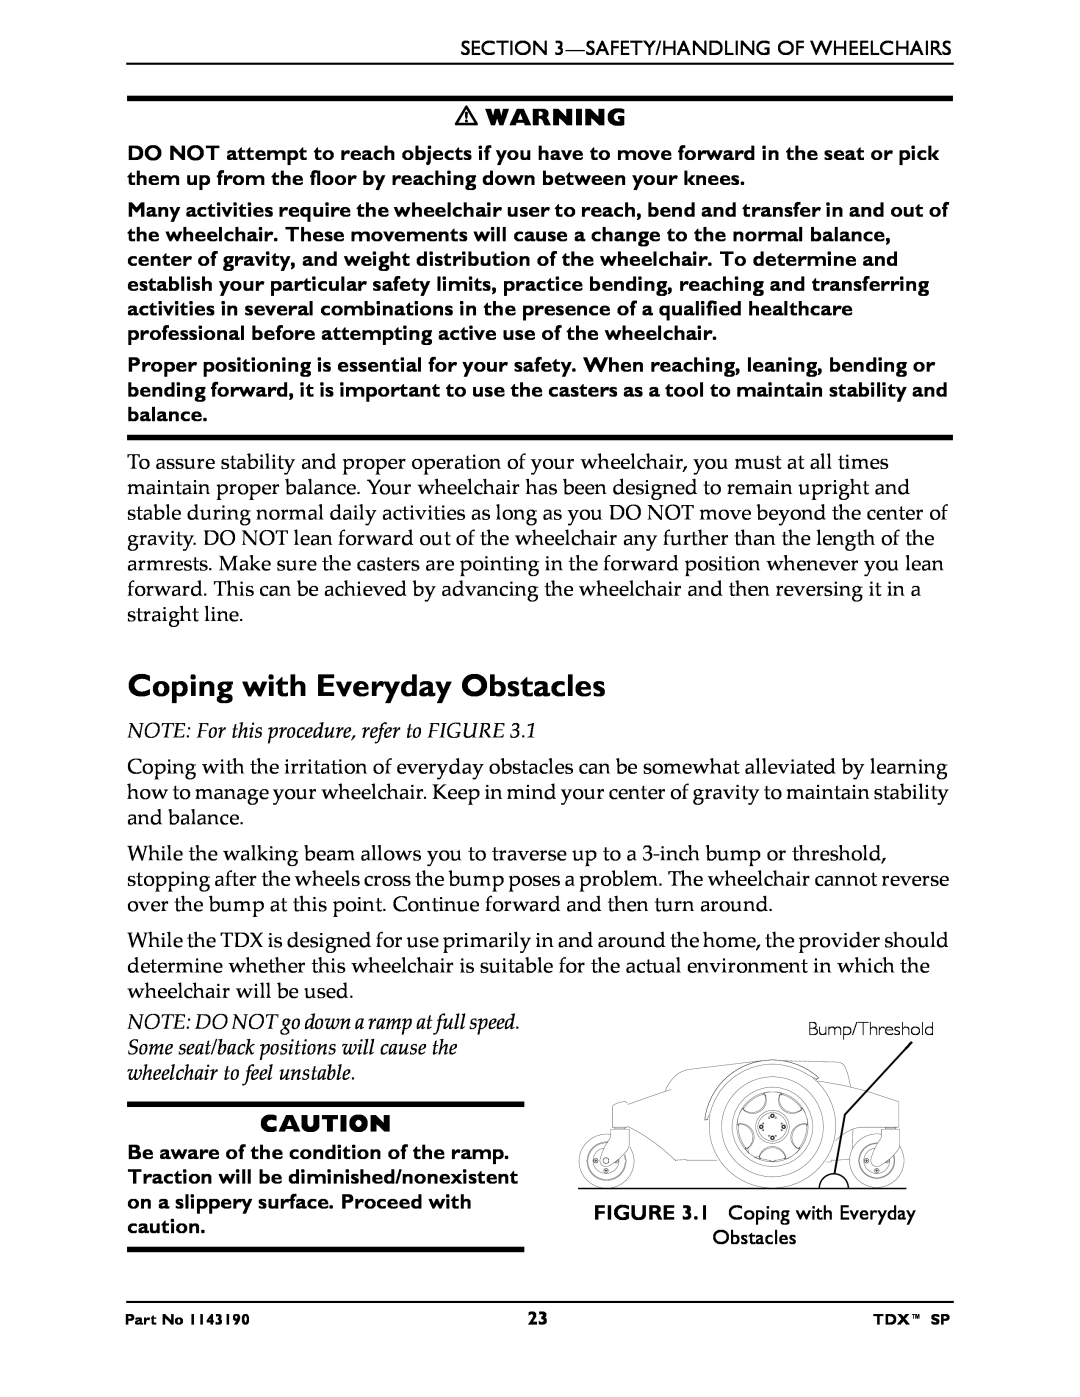 Invacare SP manual Coping with Everyday Obstacles, NOTE For this procedure, refer to FIGURE 